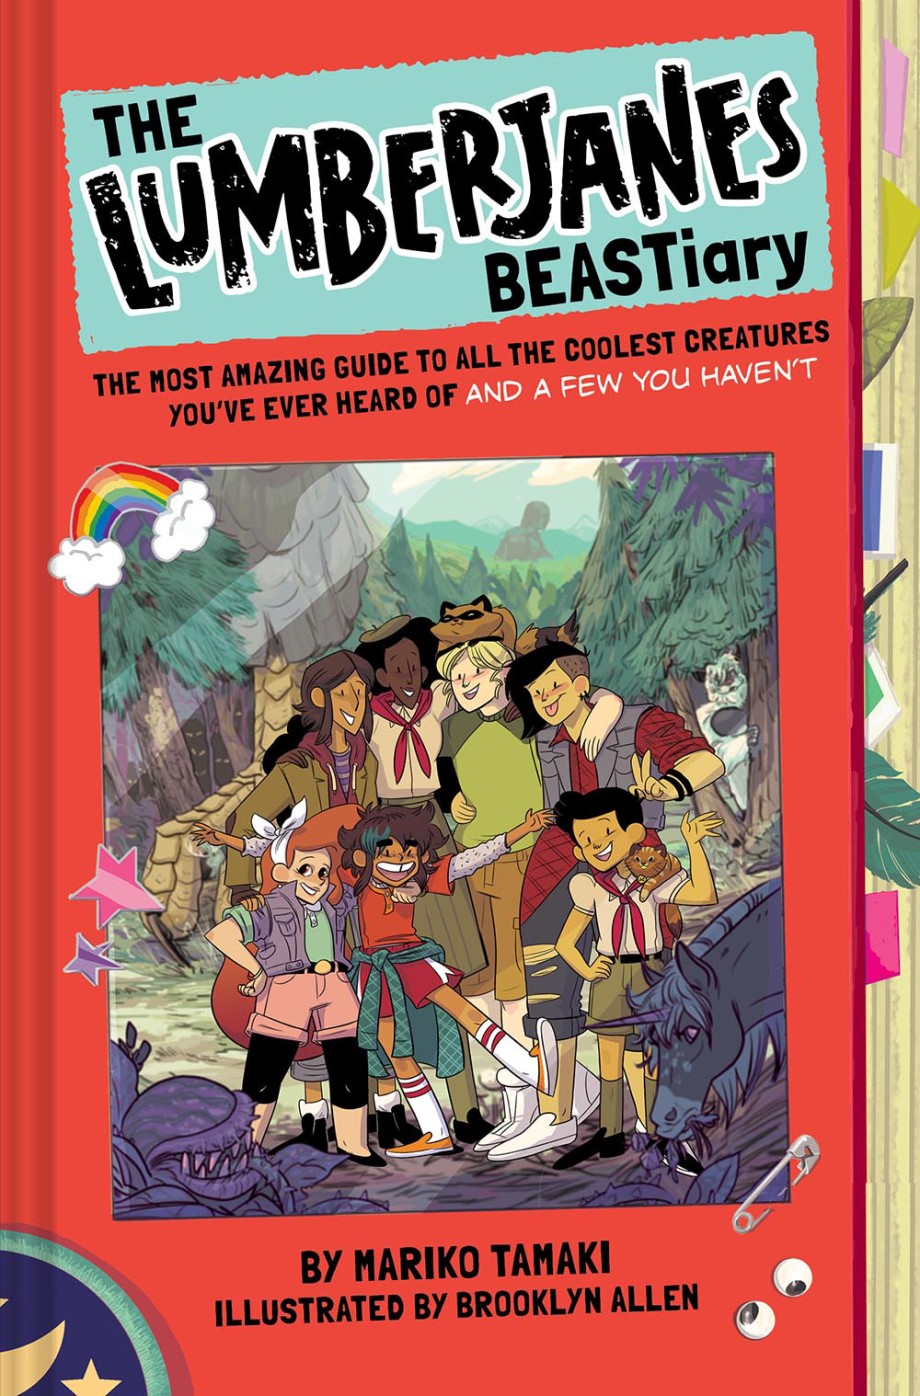 Lumberjanes BEASTiary The Most Amazing Guide to All the Coolest Creatures You've Ever Heard Of and a Few You Haven't